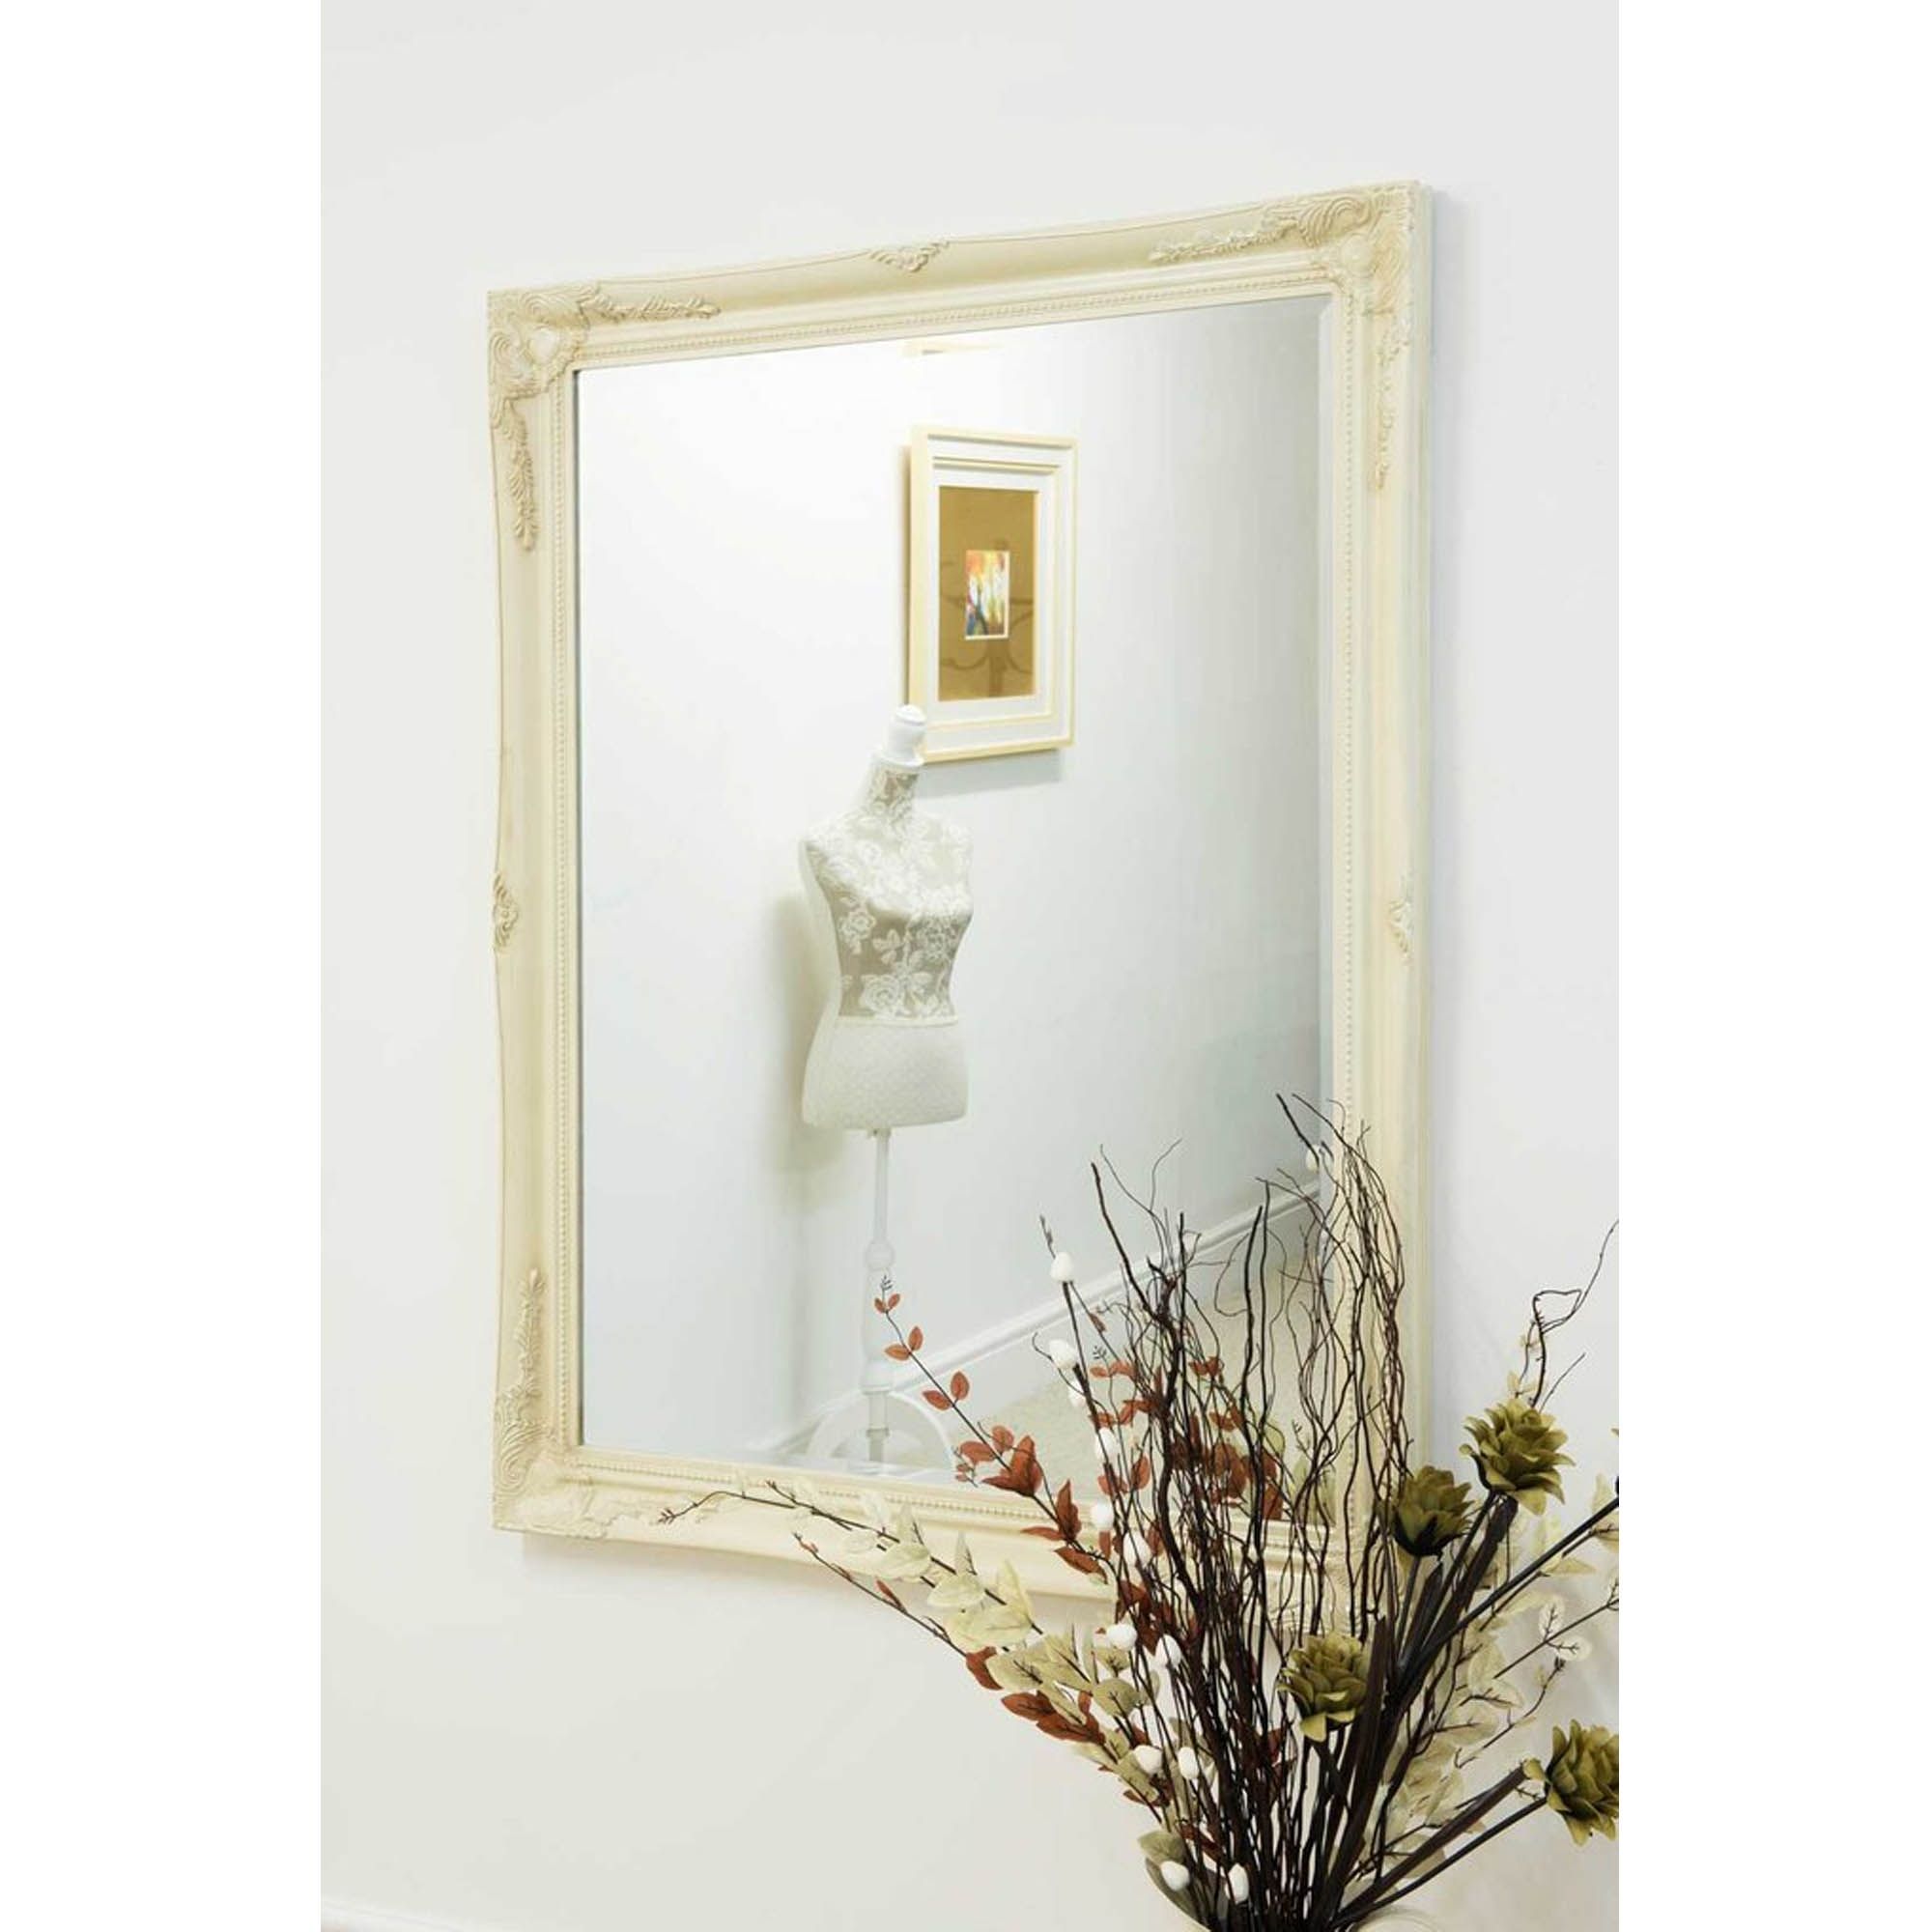 Ivory Decorative Antique French Style Wall Mirror | Decorative Mirrors Pertaining To Booth Reclaimed Wall Mirrors Accent (View 15 of 15)